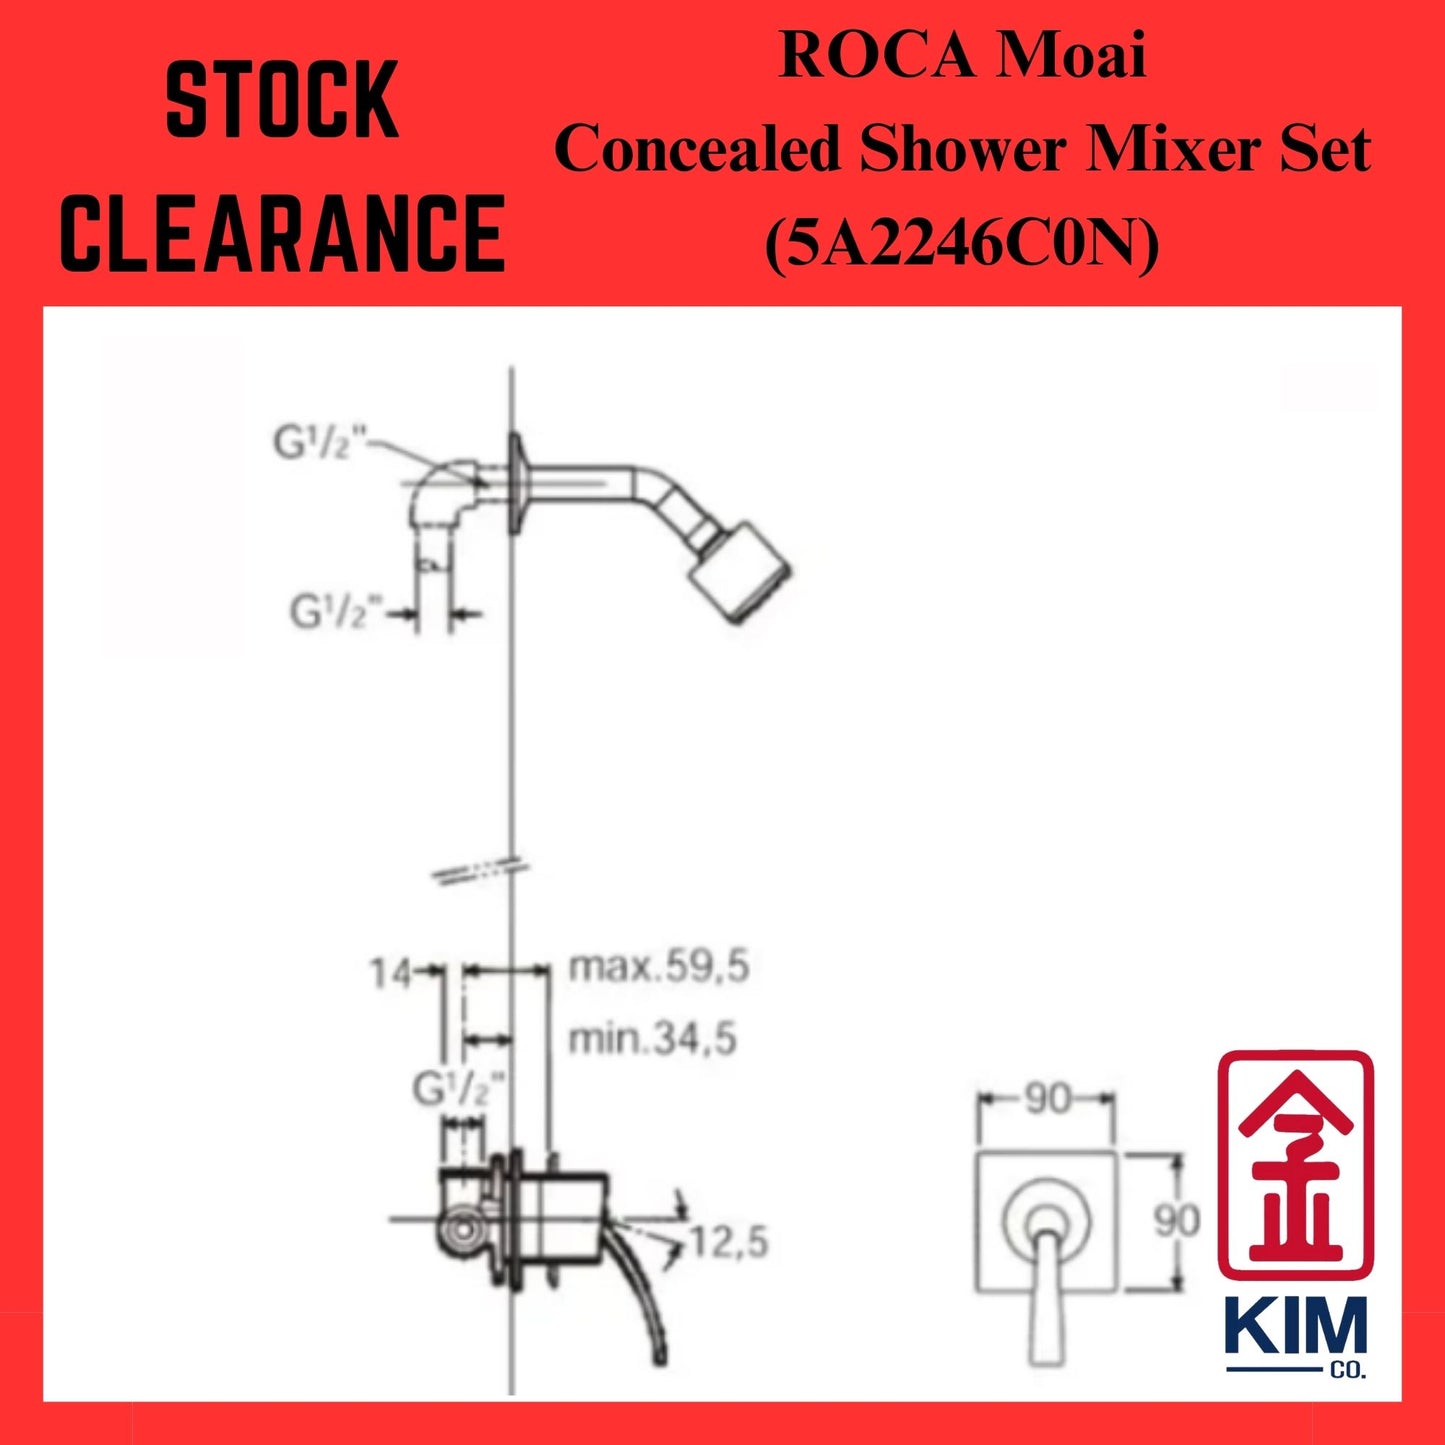 ( Stock Clearance ) Roca Moai Concealed Shower Mixer With Shower Arm & Head Set (5A2246C0N)